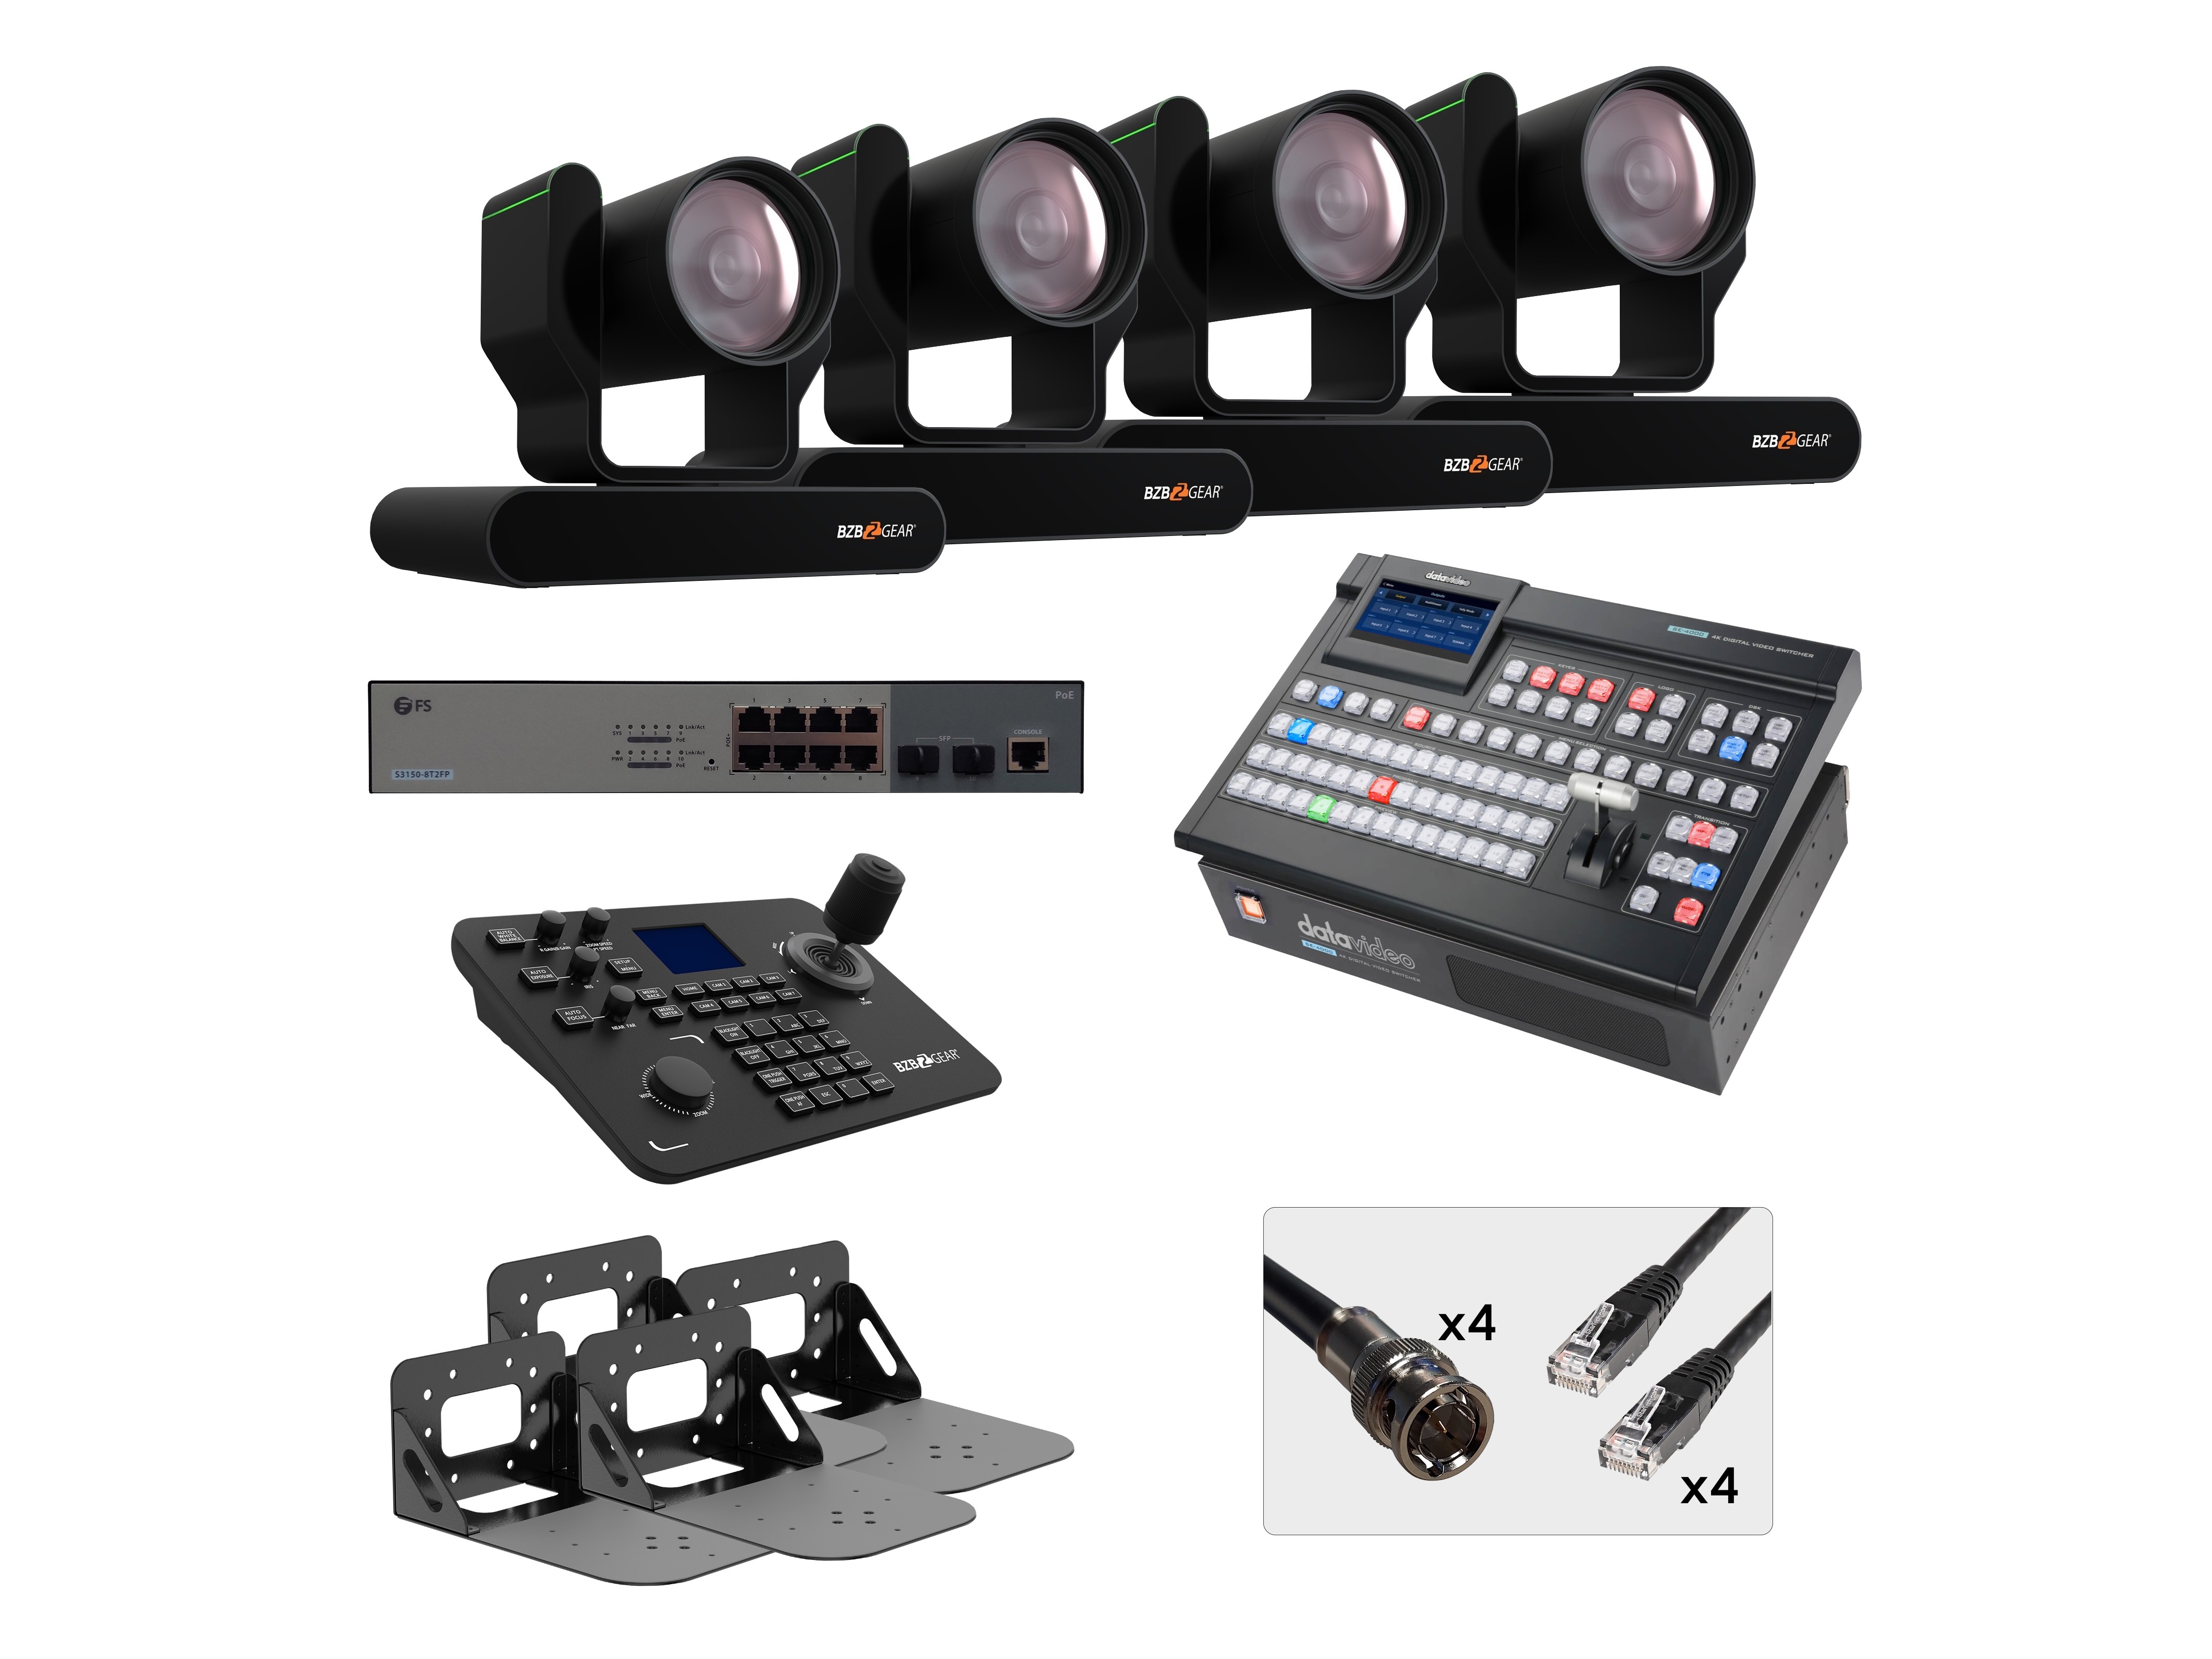 BZB-12G-PRODUCTION-KIT2 All-In-One Single Operator 4K 12G Production Bundle with Four BZBGEAR 25X PTZ Camera/Joystick Controller/DATAVIDEO 4K Mixer/Black Wall Mount by BZBGEAR